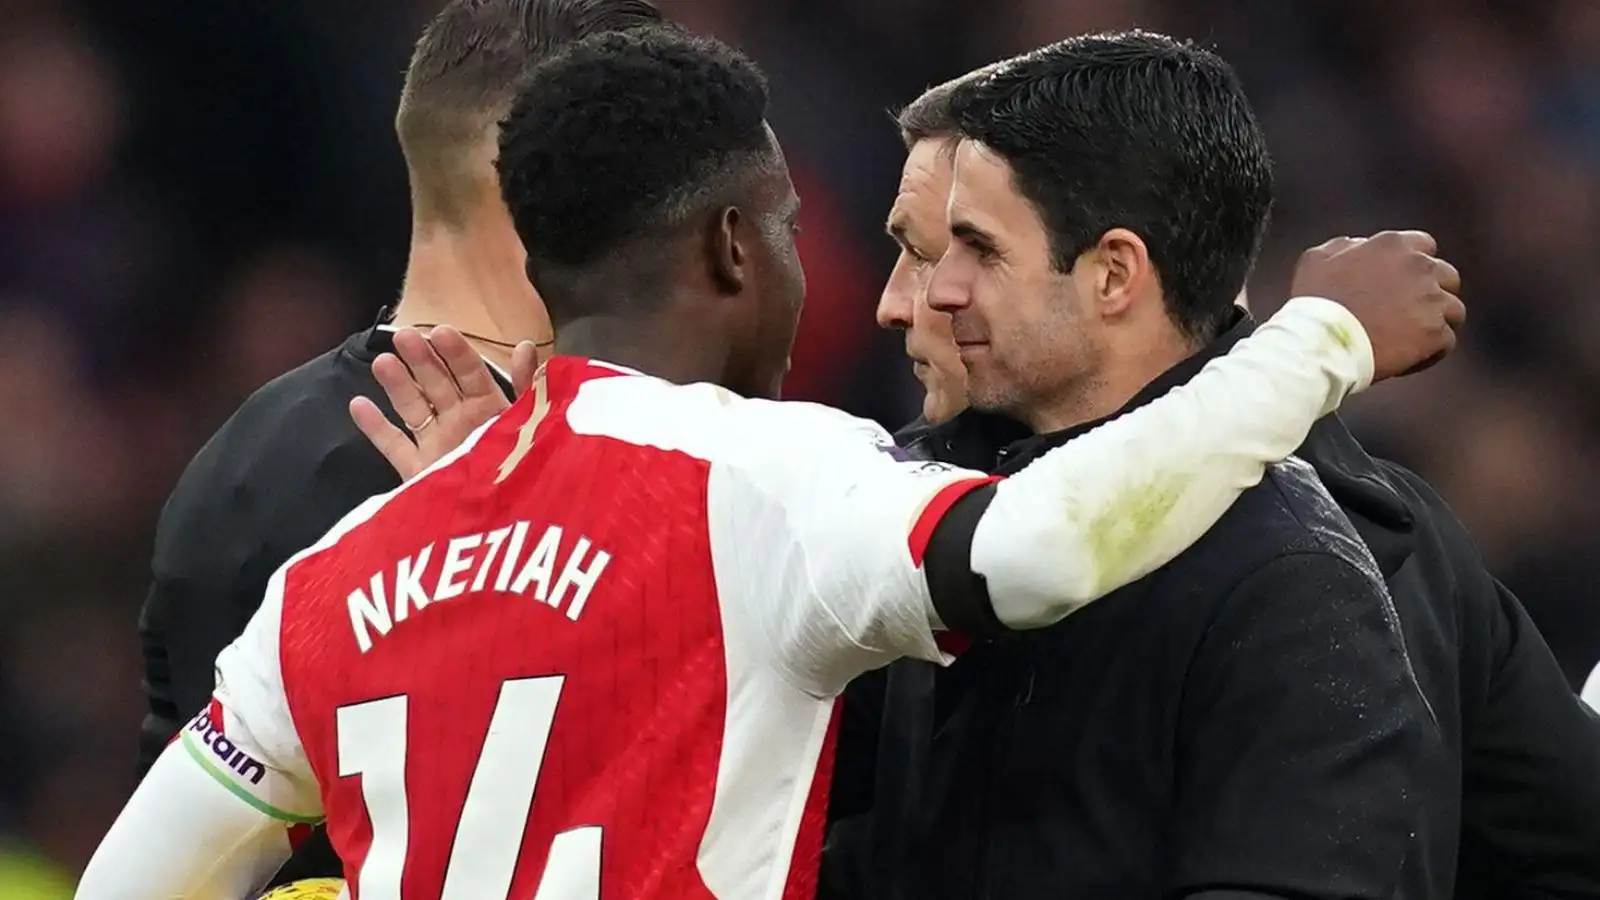 Arsenal: Arteta tells ‘trusted’ Nketiah to ‘enjoy’ hat-trick and explains decision not to play Odegaard